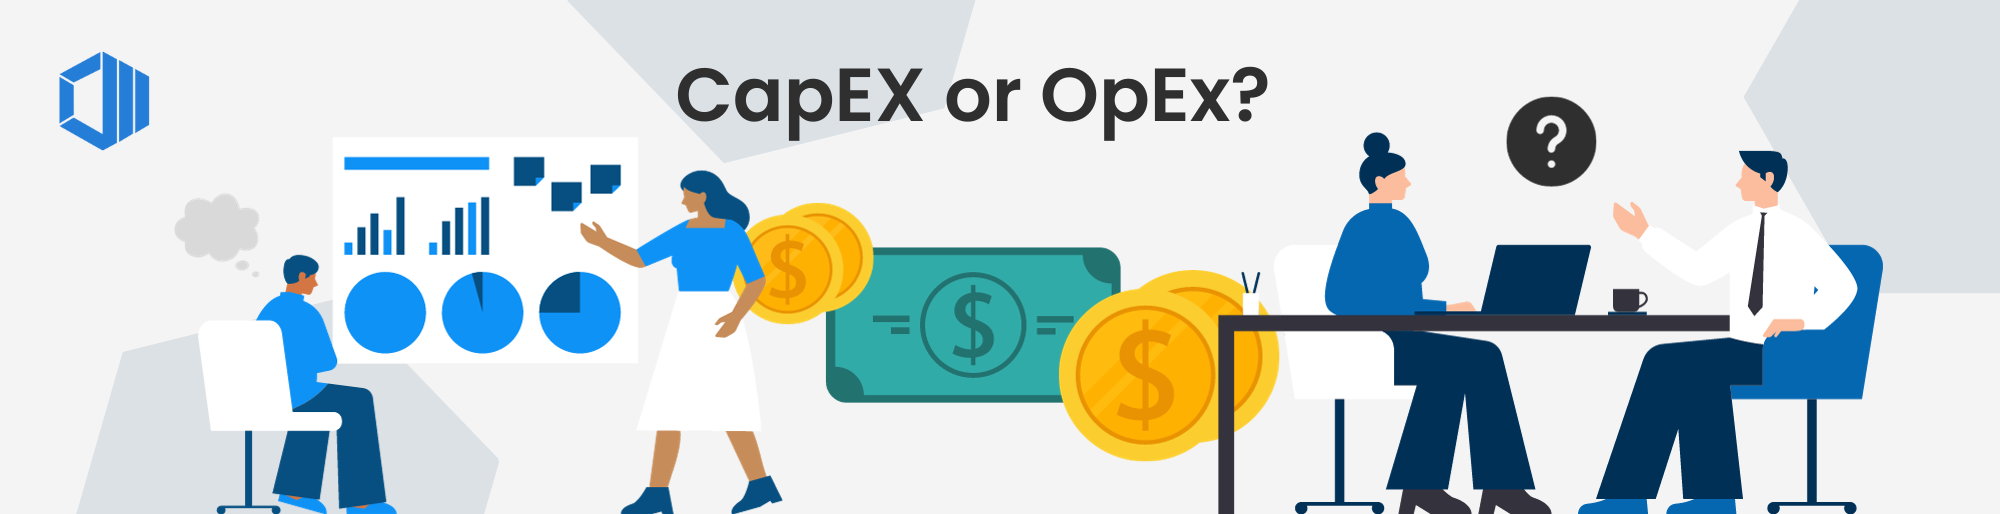 CapEx or OpEx what to decide